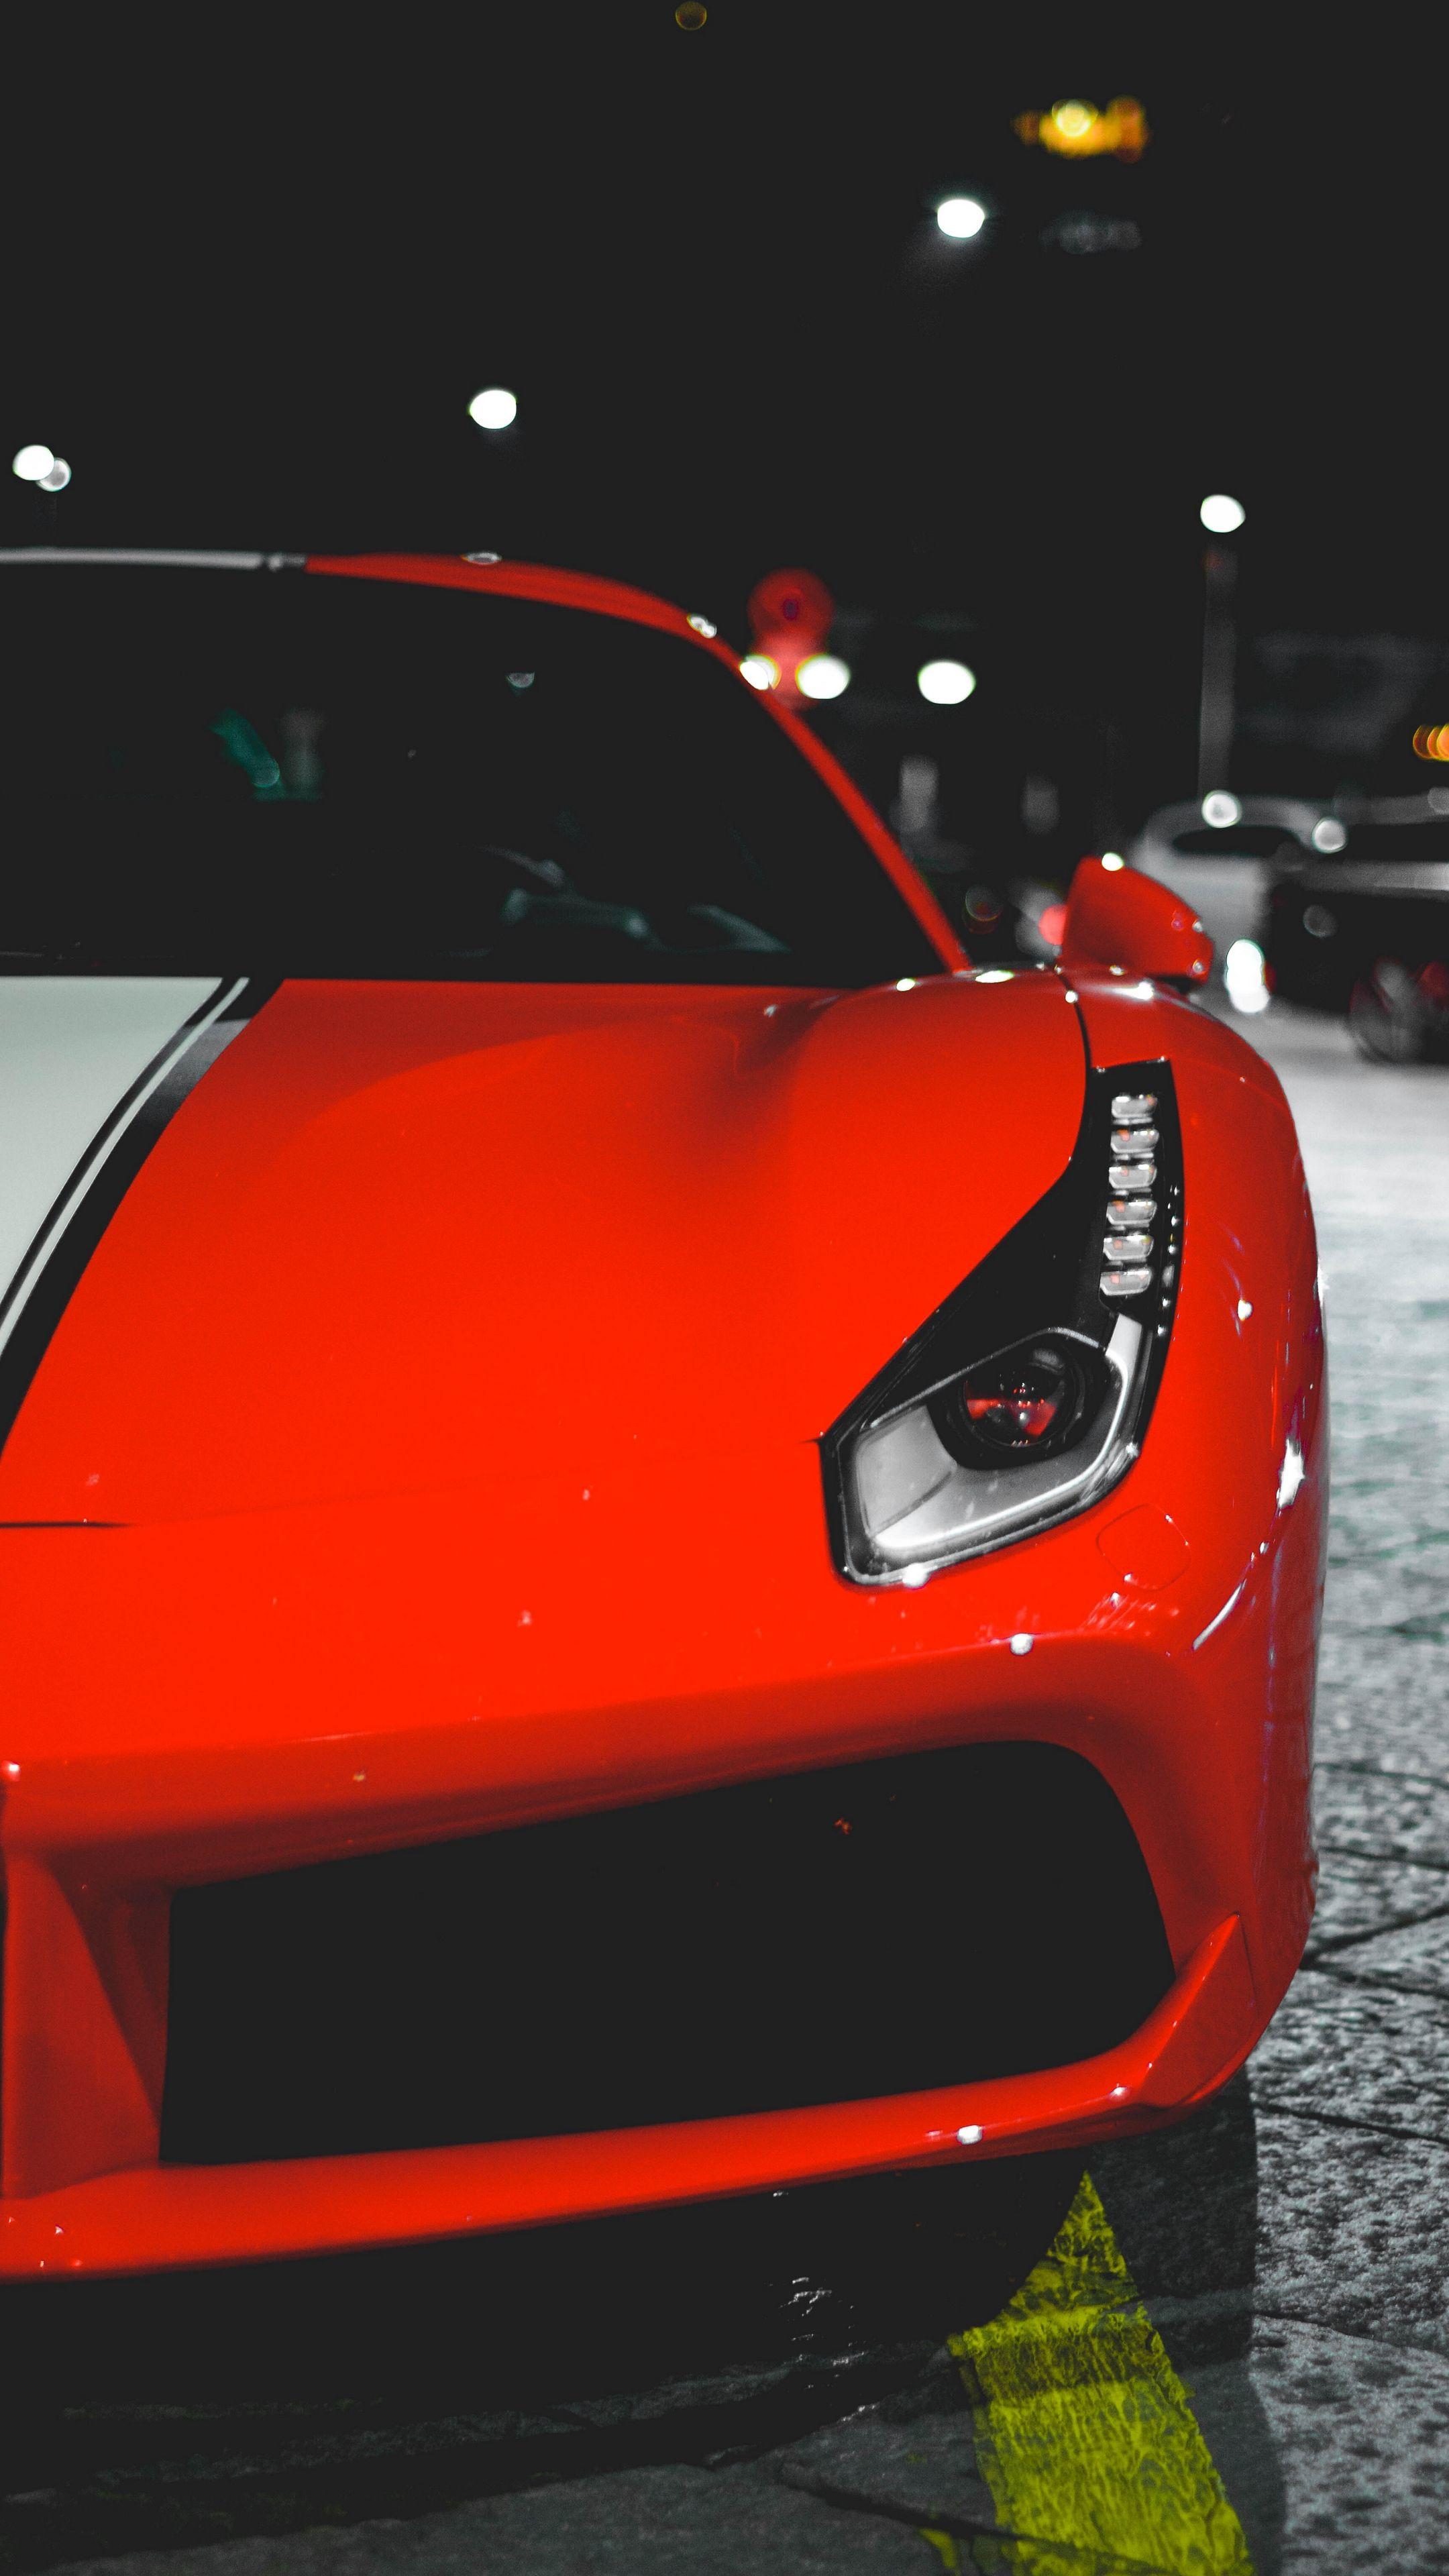 Cars #auto #frontview #red #wallpaper HD 4k background